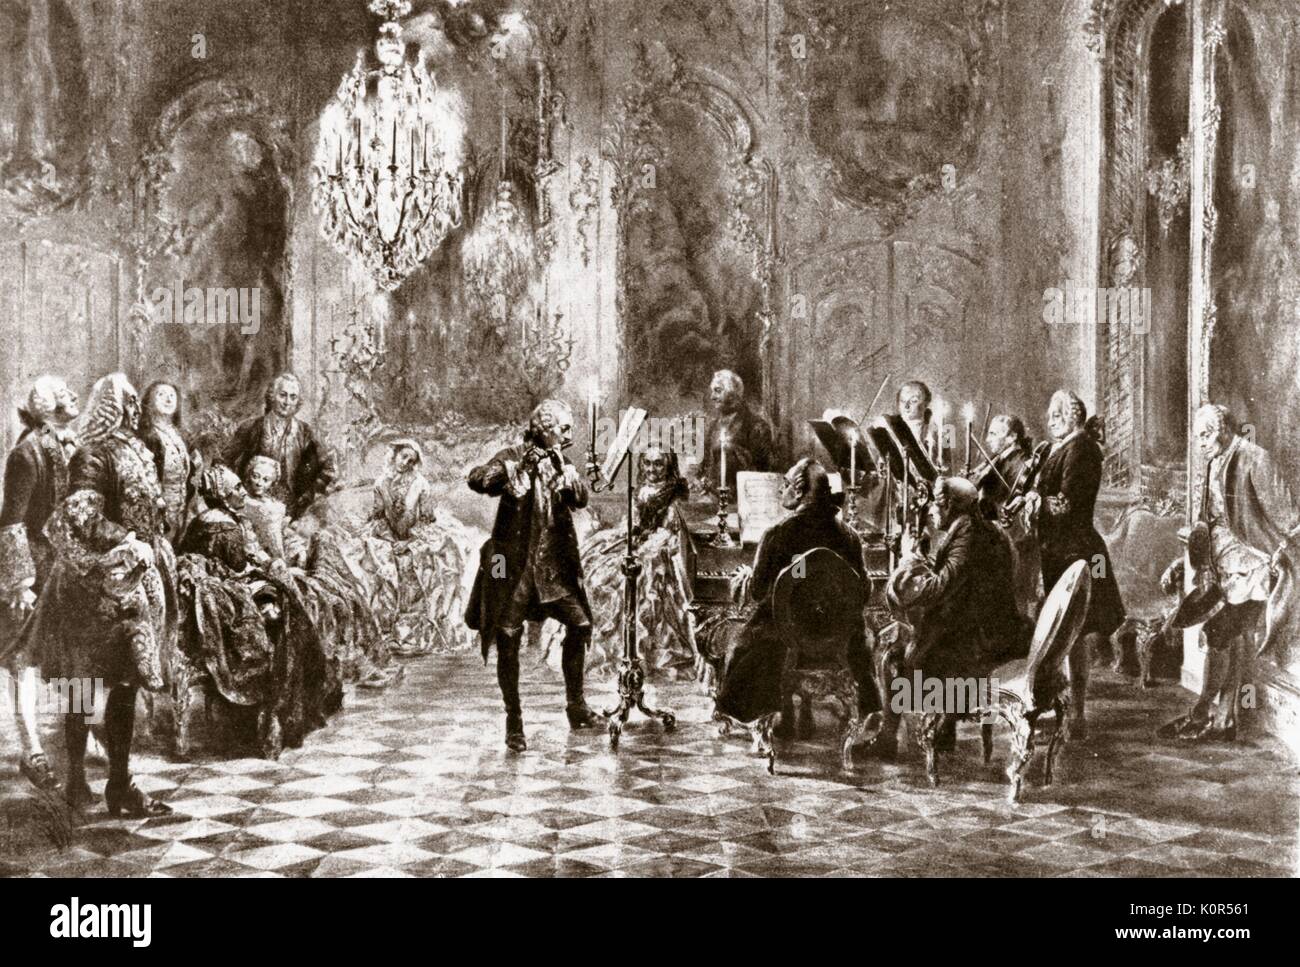 Frederick the Great and his court making music.  Frederick playing the flute. Flautist and composer. At Sanssouci by Adolf von Menzel.  At piano PE Bach,JS Bach's 2 sons and Benda. Audience of court ladies and gentlemen. King of Prussia, 24 January 1712  – 17 August 1786. Stock Photo